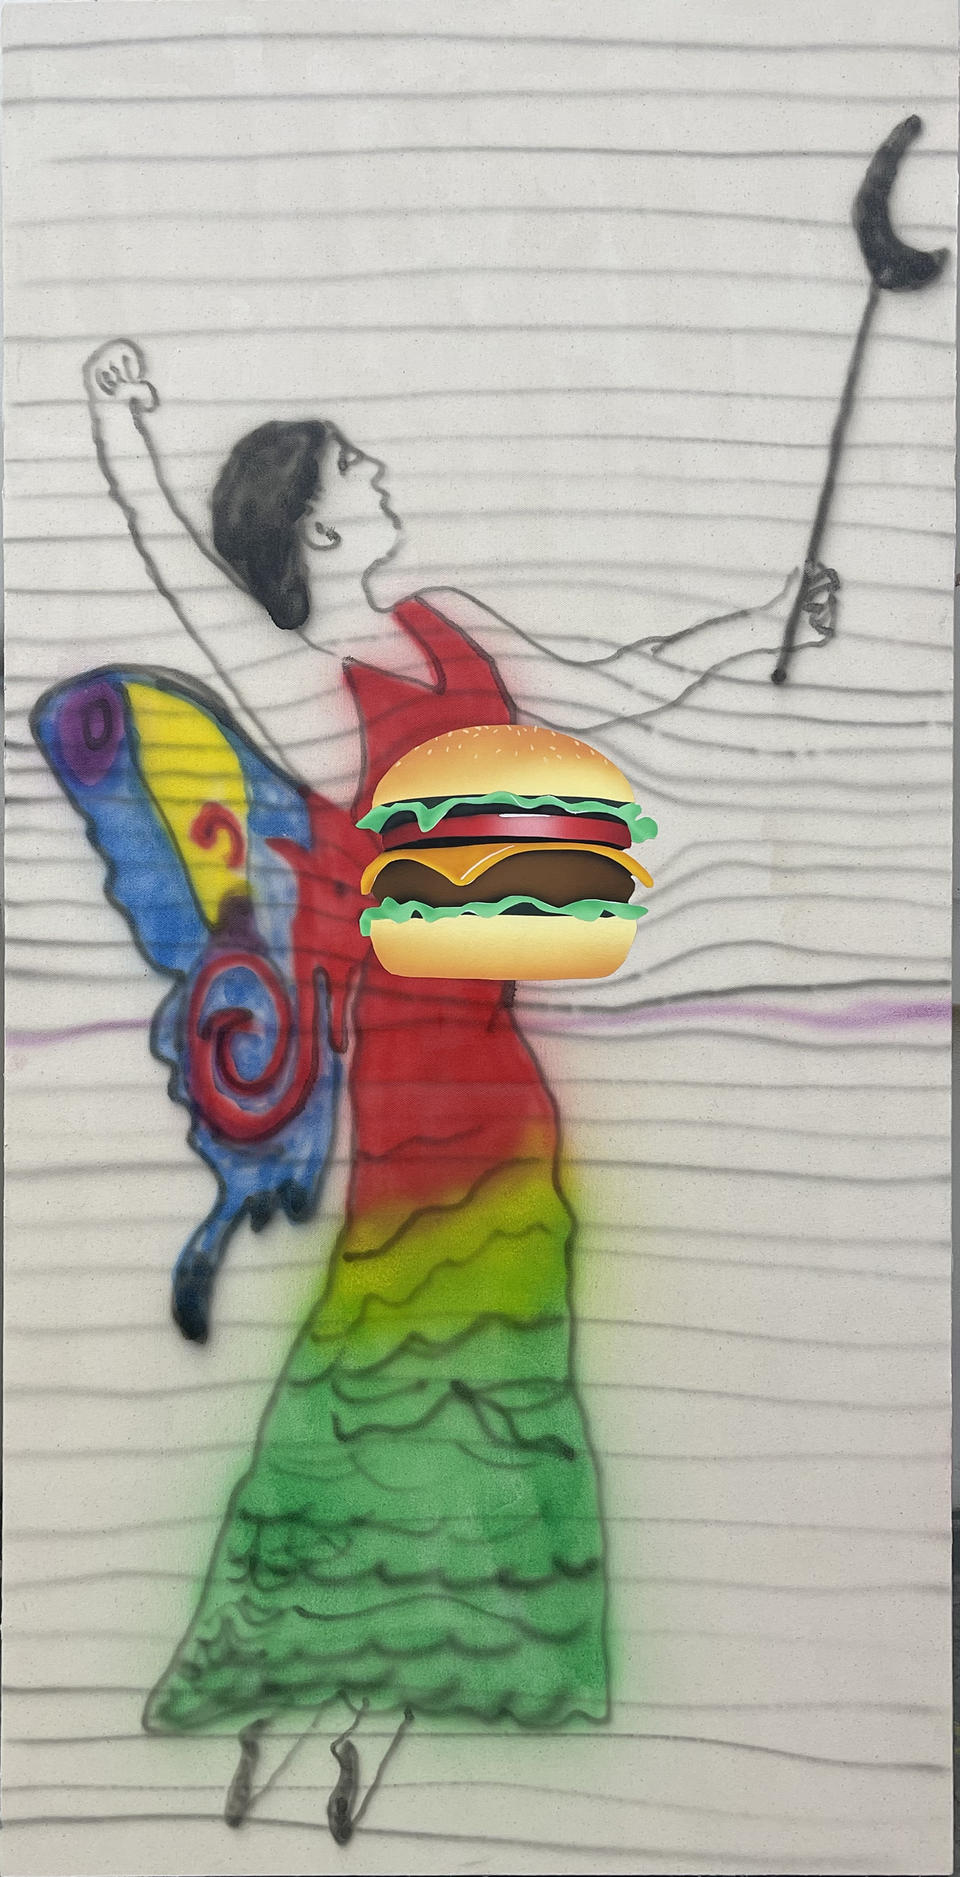 A fairy god mother granting a wish that is a giant hamburger